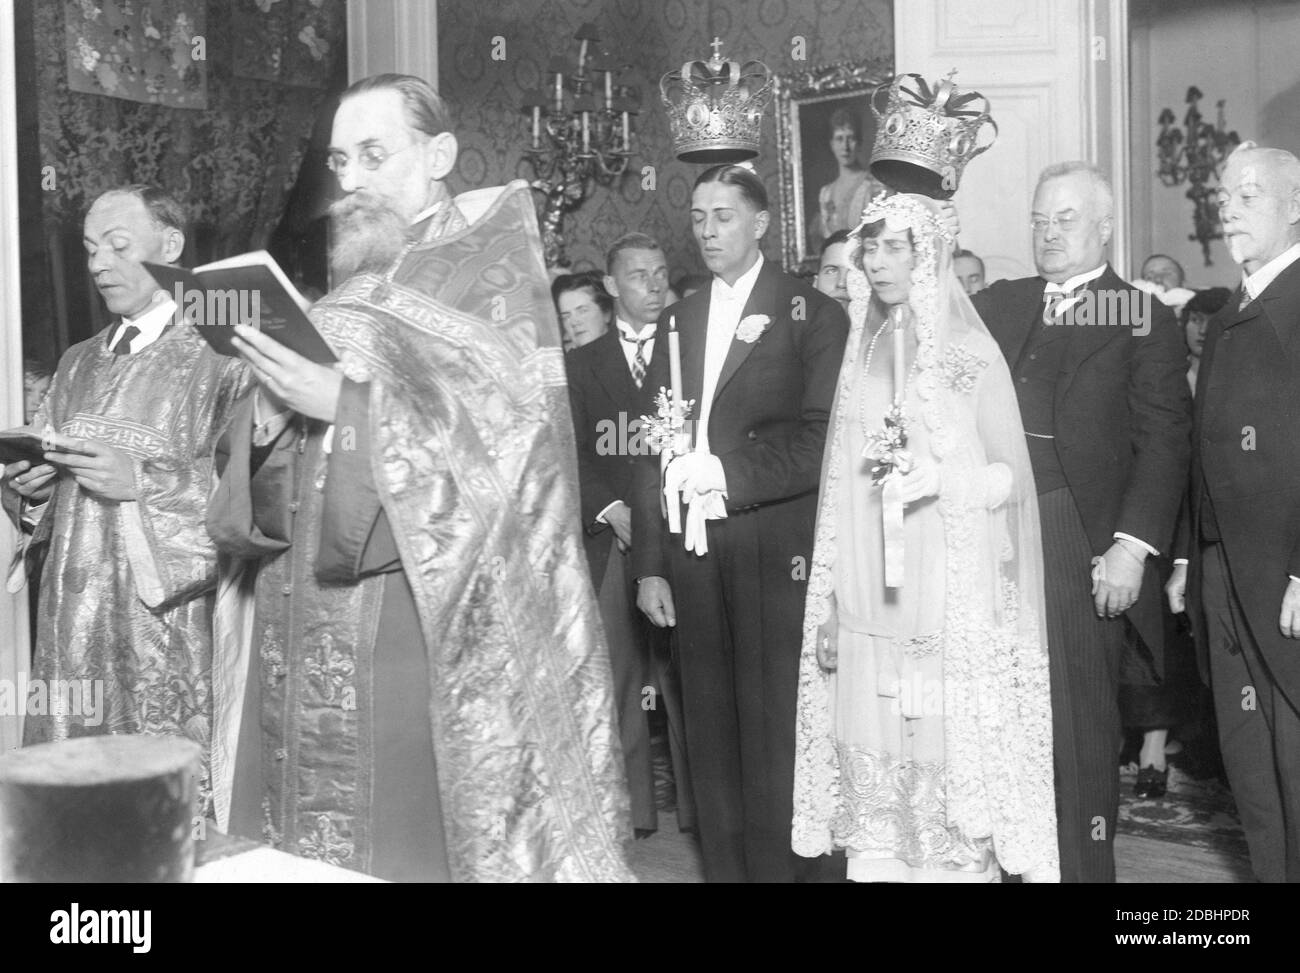 A few days after their civil wedding on February 27, 1927, Alexander Zoubkoff (a Russian emigrant) and Viktoria (nee Princess of Prussia, in her first marriage of Schaumburg-Lippe) had a church wedding celebrated by the Russian Orthodox Bishop Alamatow (from Wiesbaden) in Bonn. Stock Photo